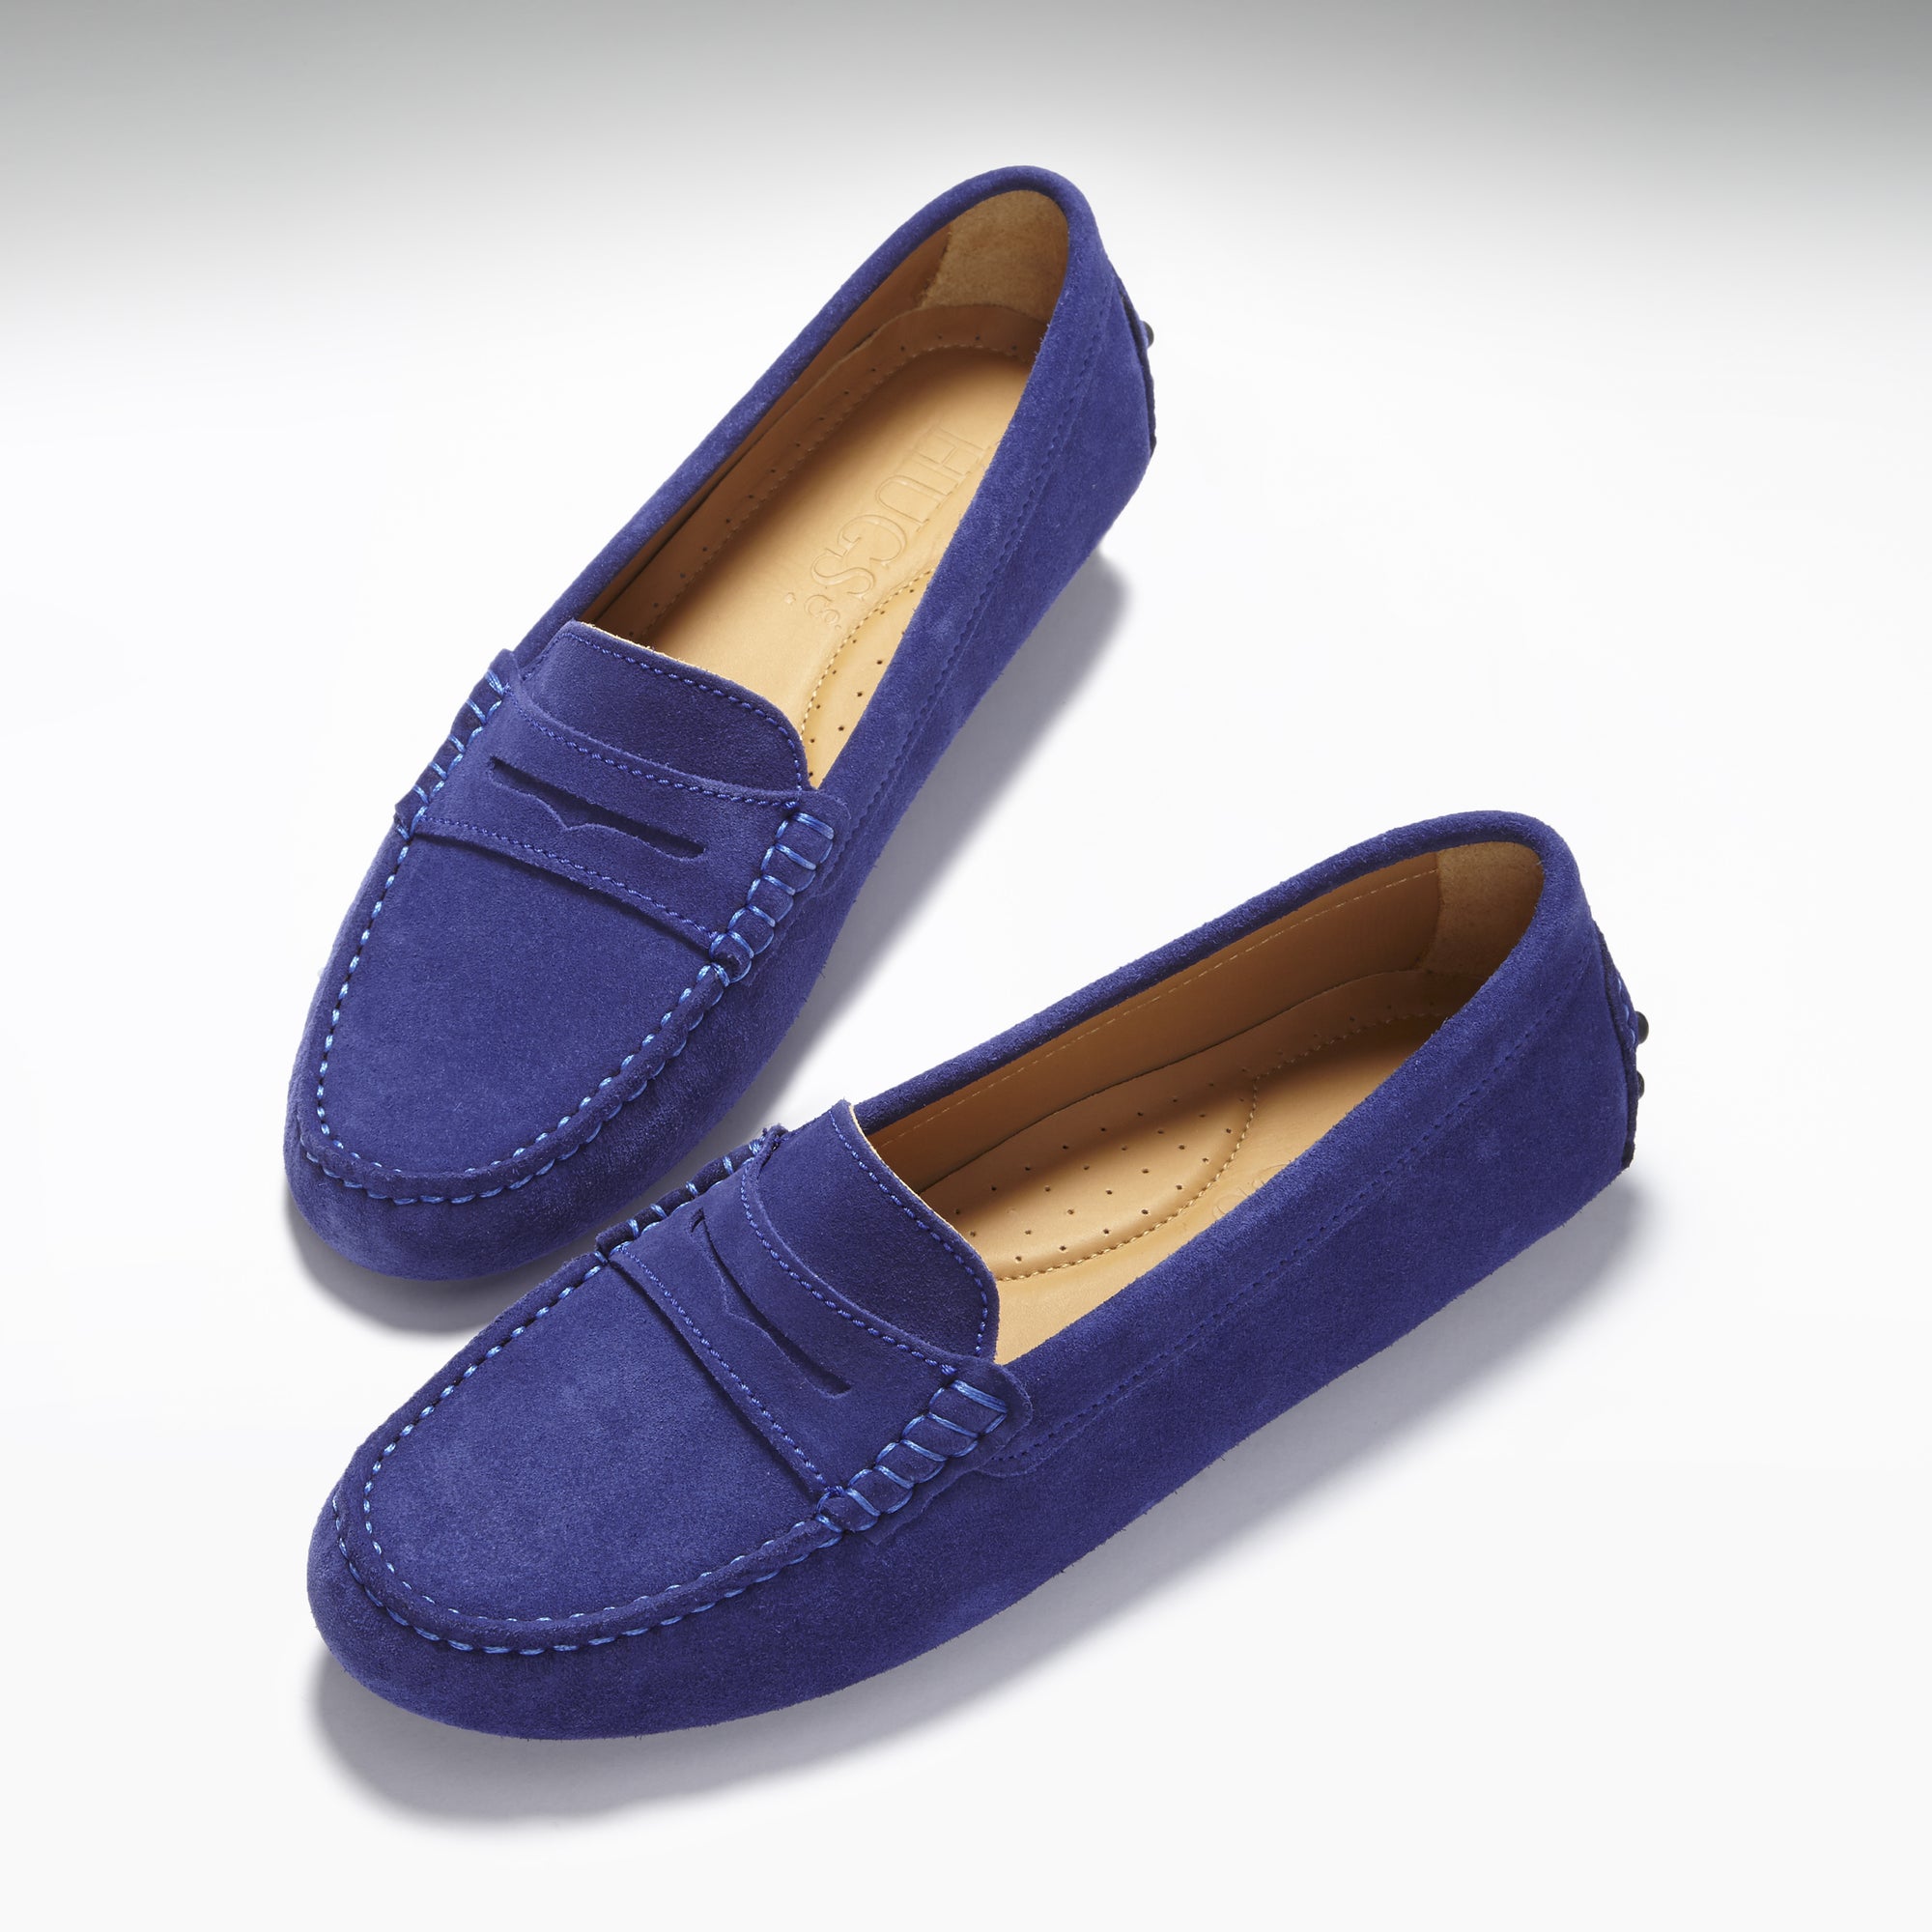 Women's Penny Driving Loafers, ink blue suede